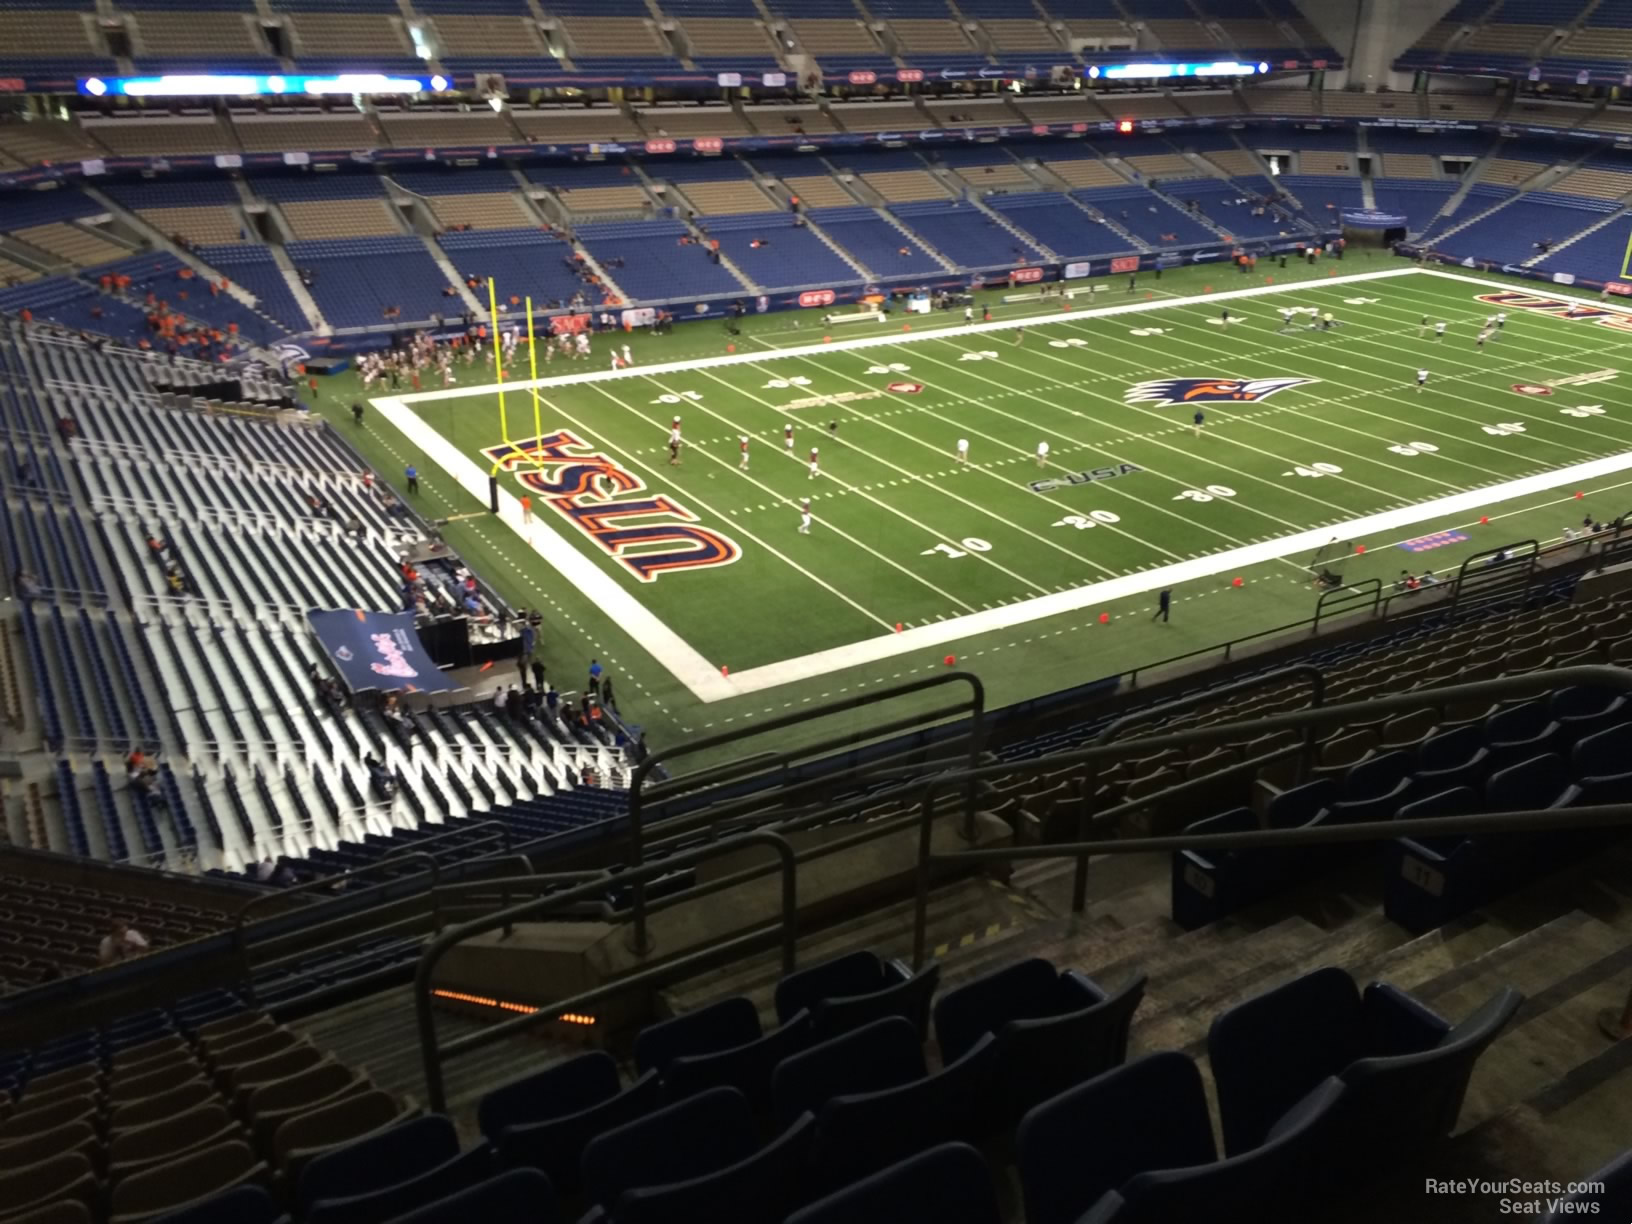 section 319, row 15 seat view  for football - alamodome